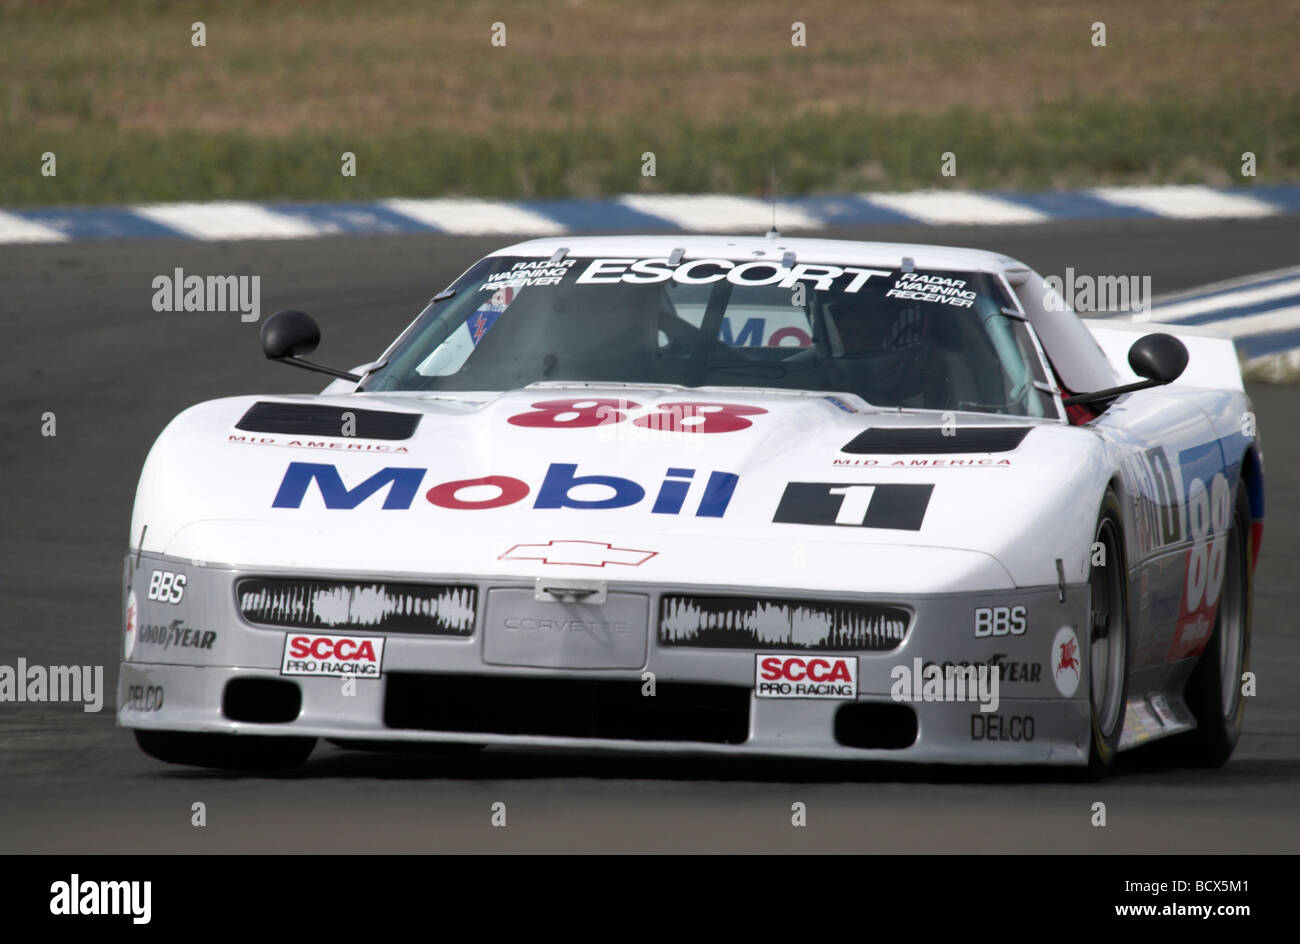 A 1988 Protofab Chevy Corvette participates in a vintage racing event. Stock Photo